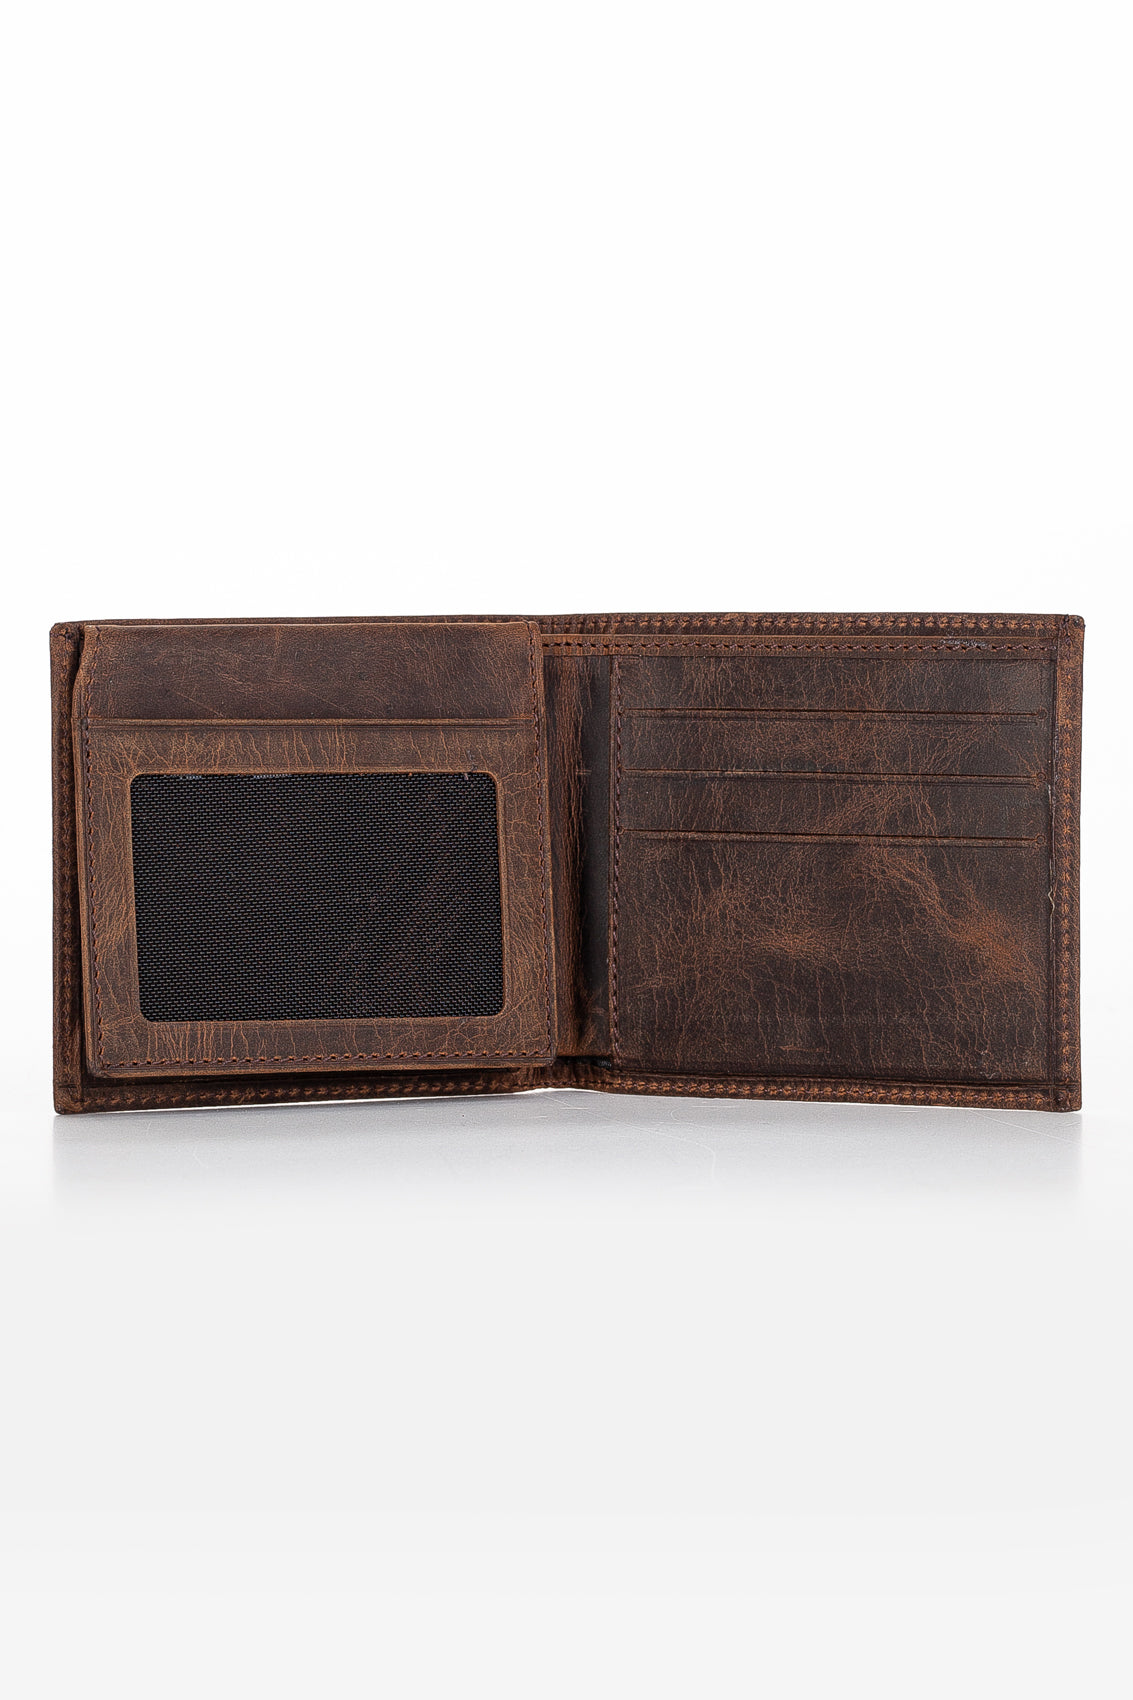 Niki Leather Sane-A Crazy Leather Wrapped Stitched Men's Wallet